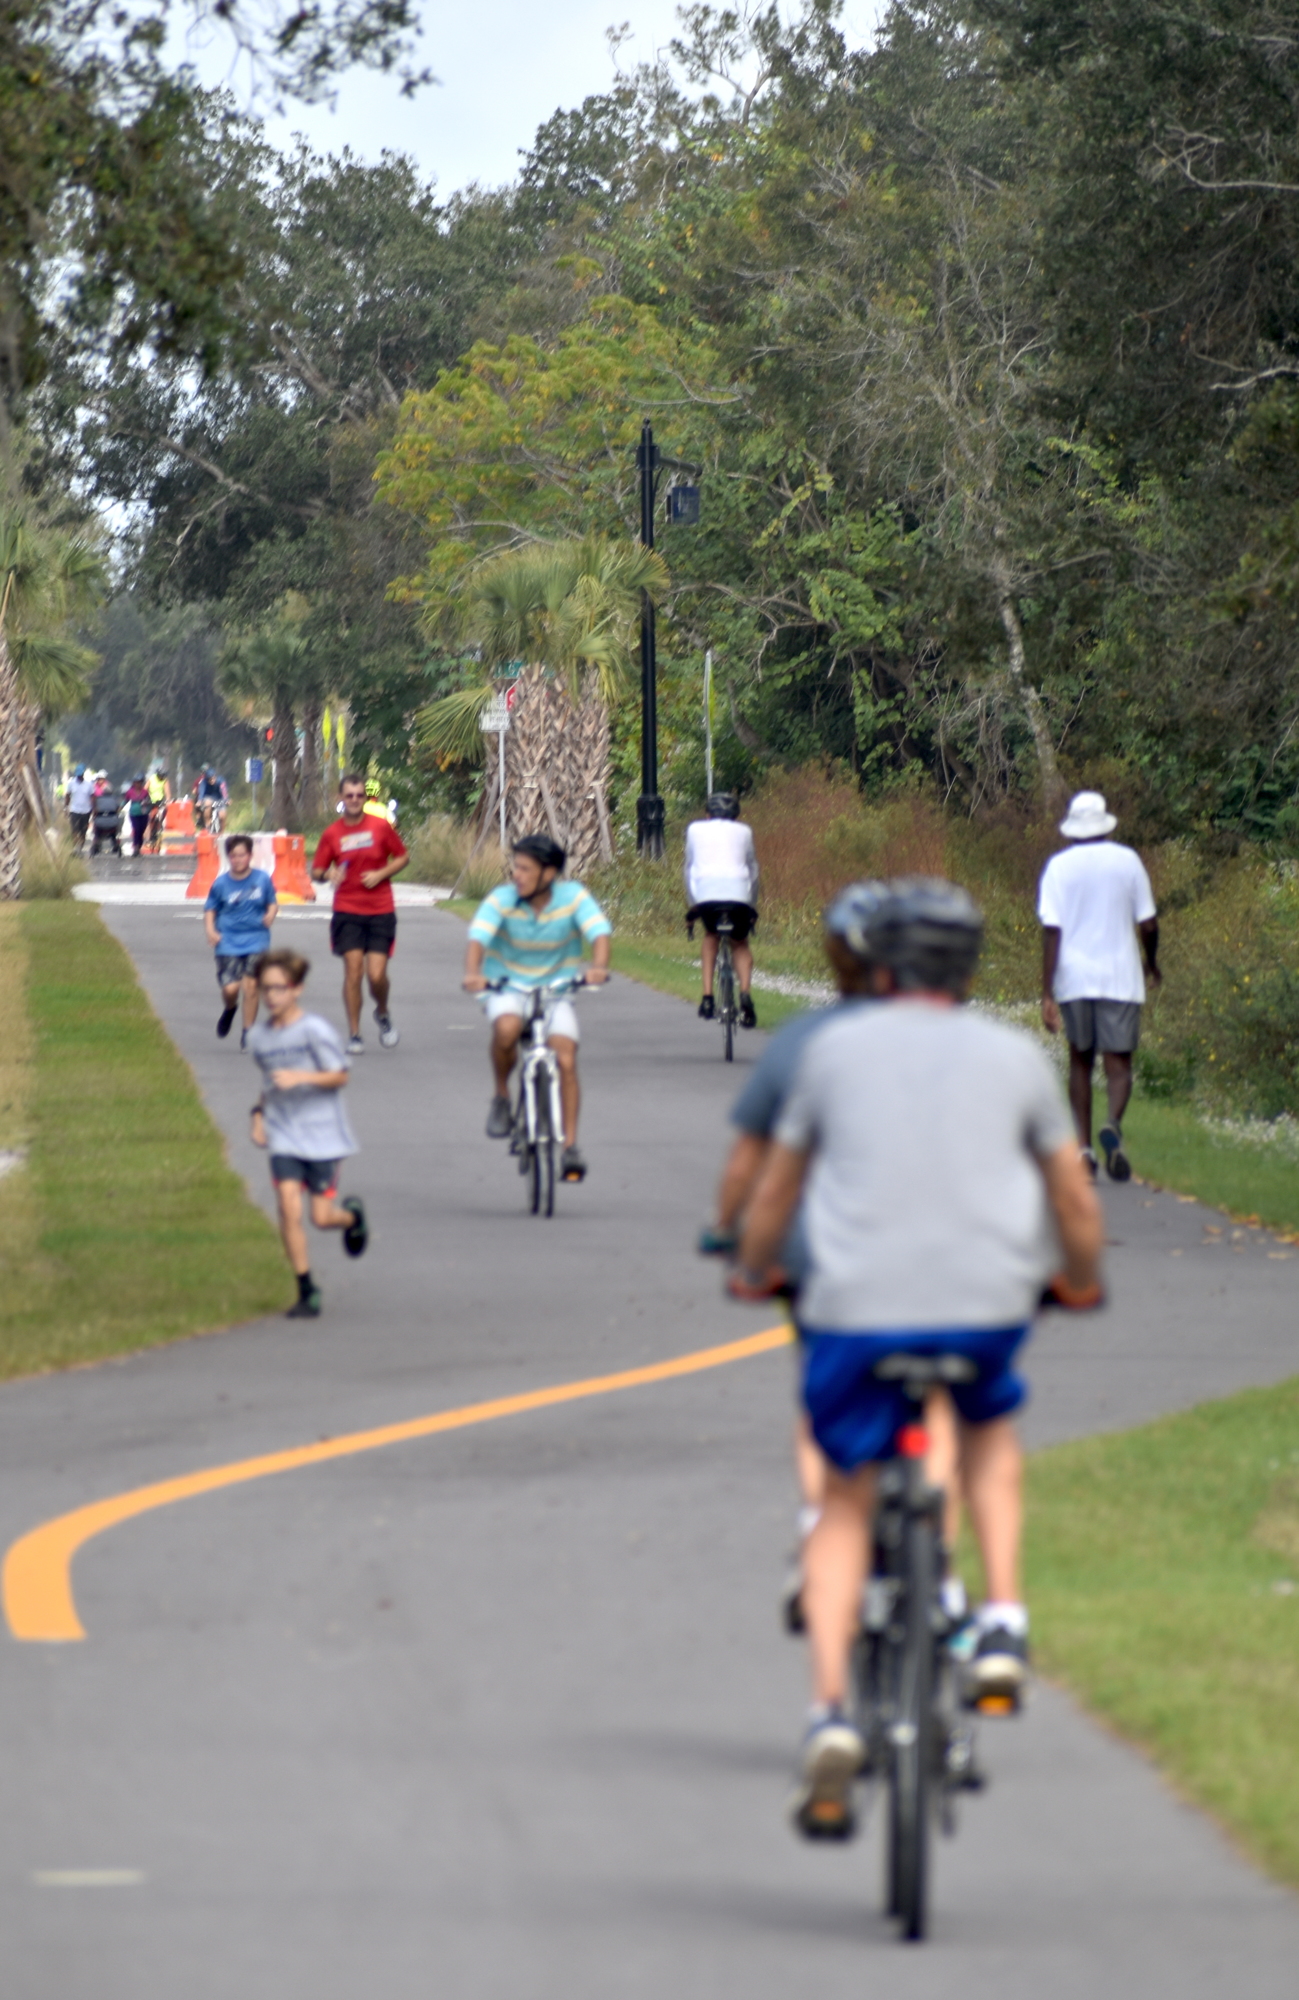 Walkers, runners and riders converge at the Ashton Road Trailhead.